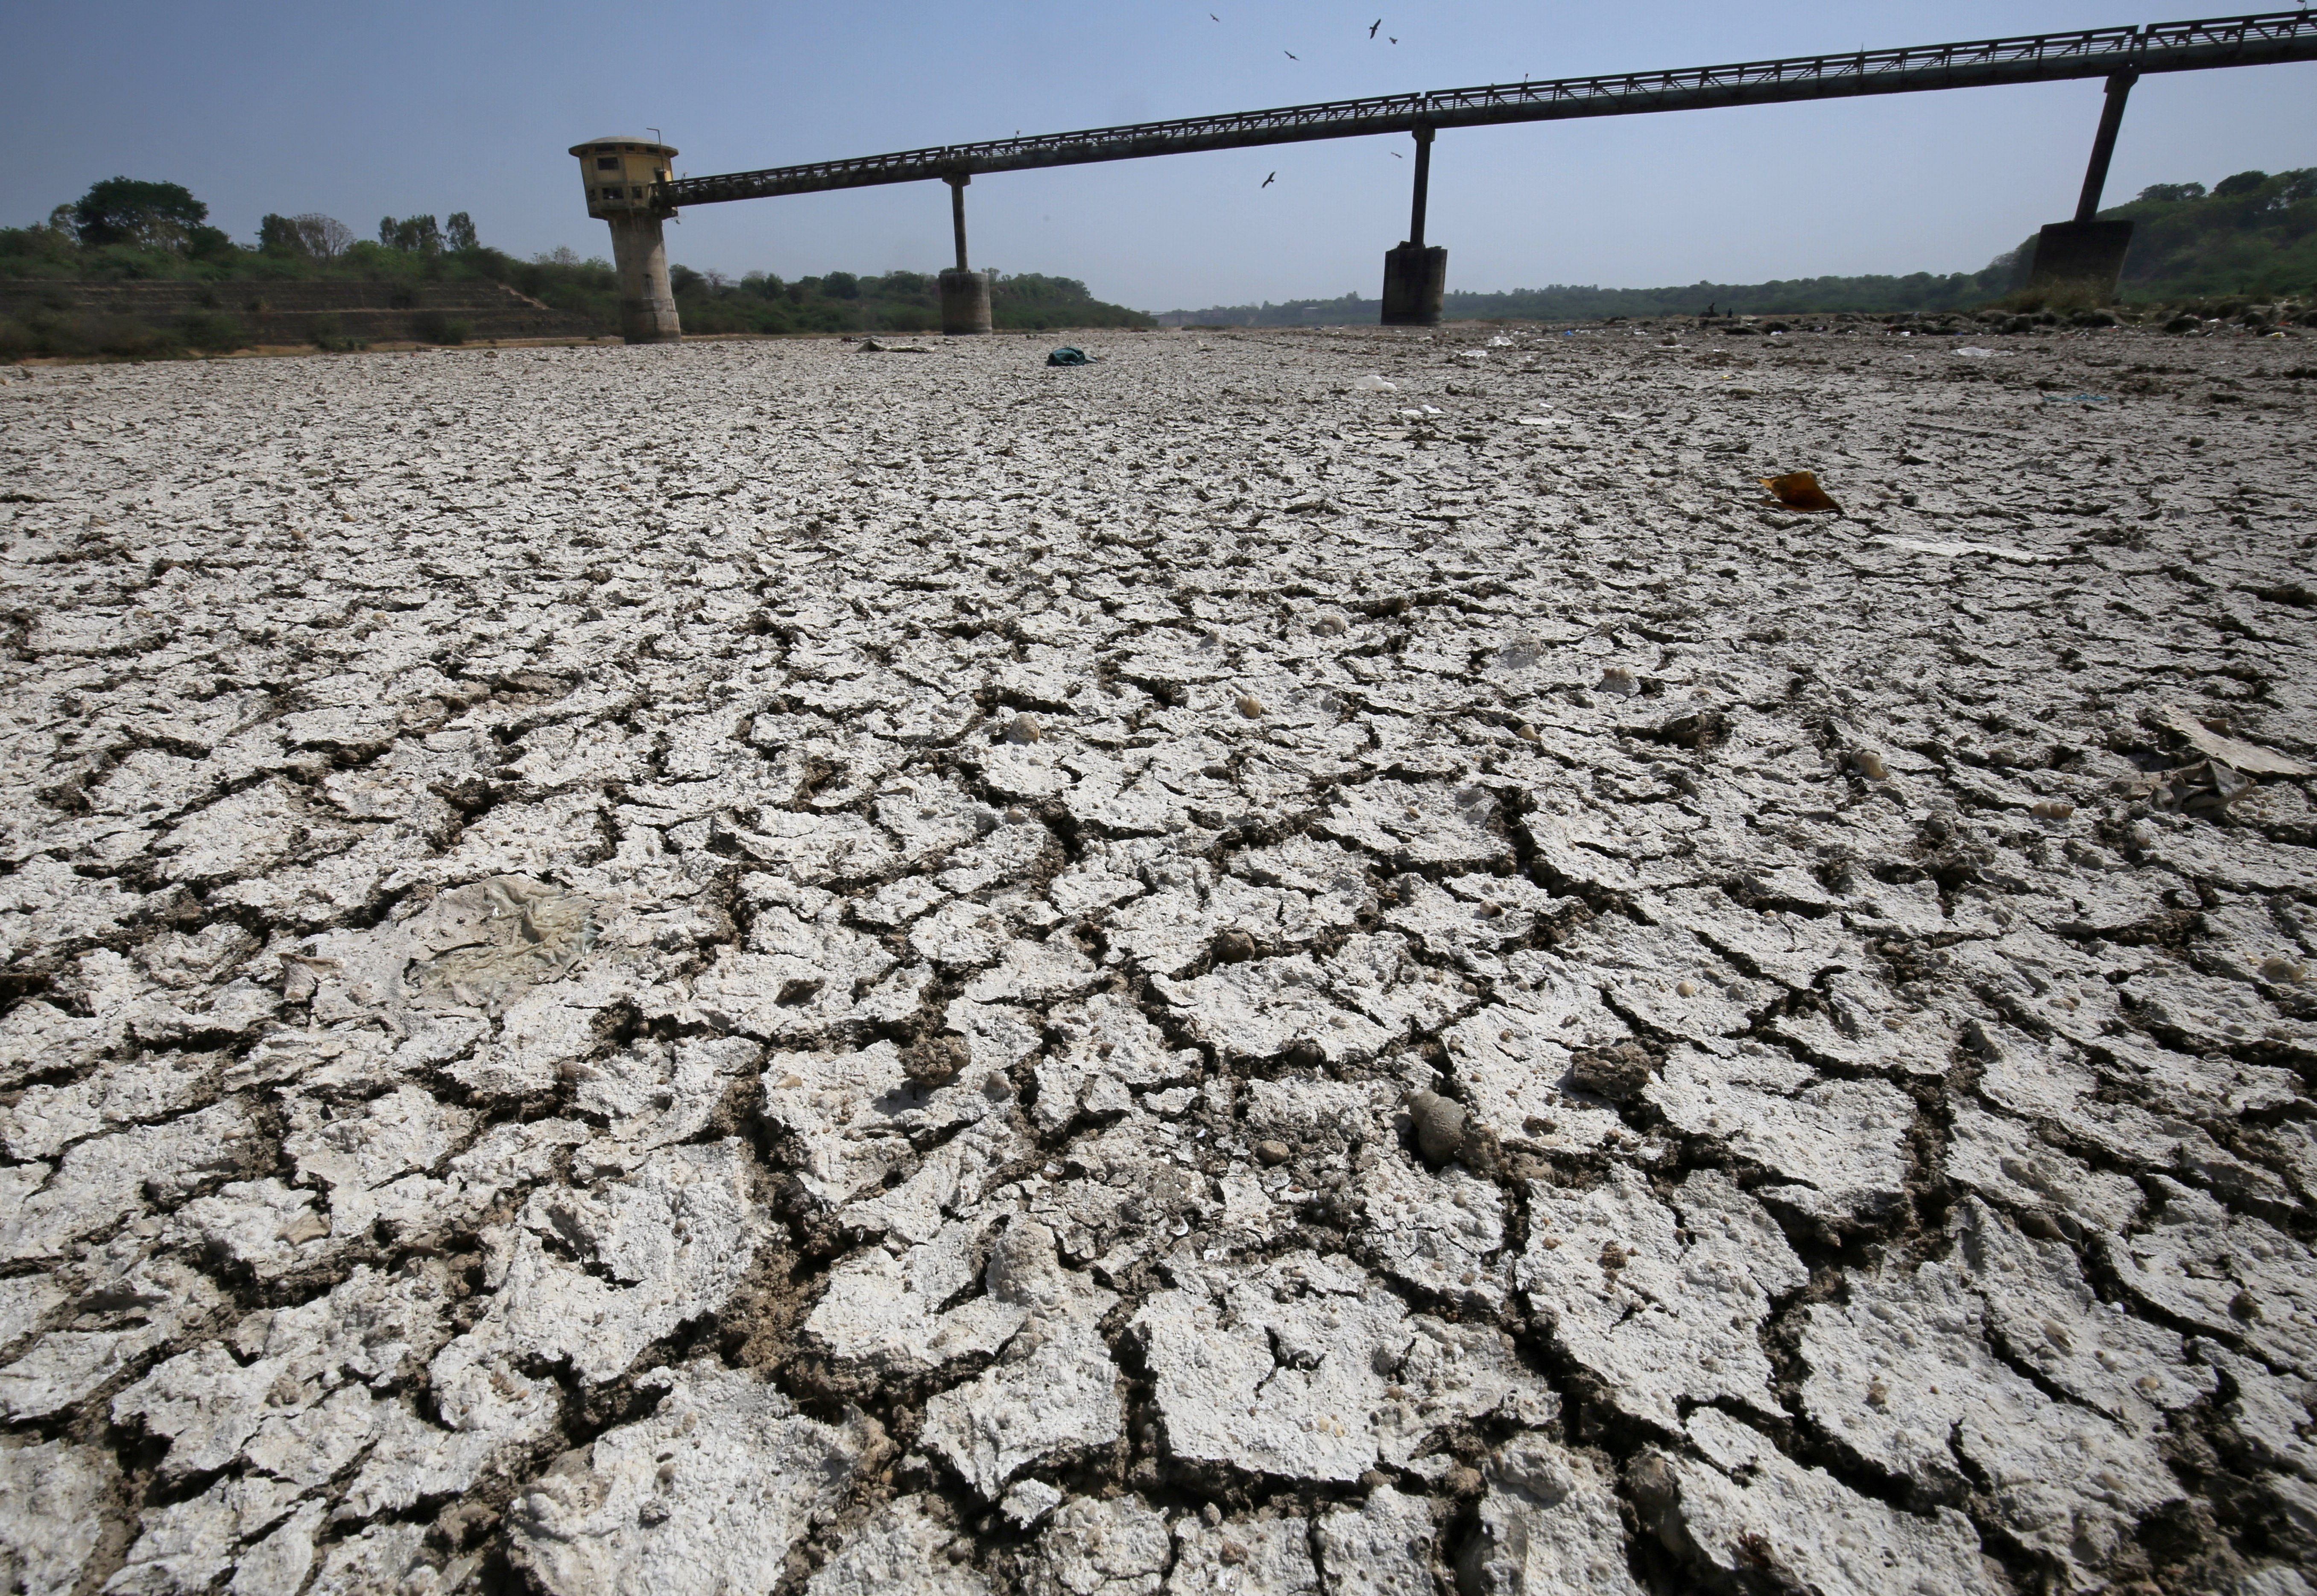 A water pump shed is seen in the dried-up portion of the Sabarmati river on a hot day on the outskirts of Ahmedabad